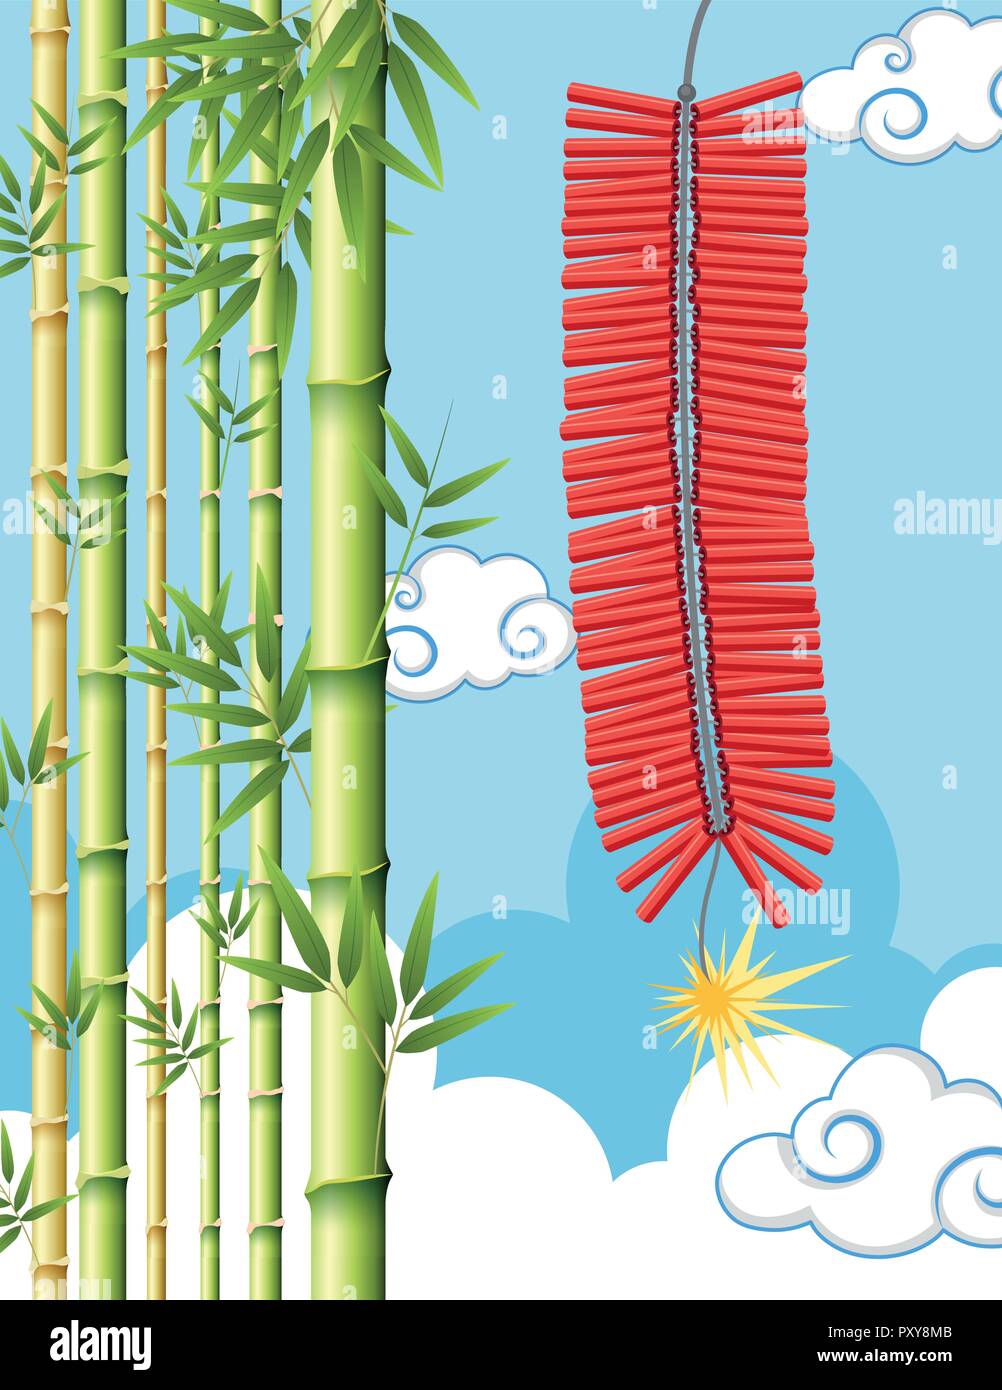 Firecrackers and bamboo tree in sky illustration Stock Vector